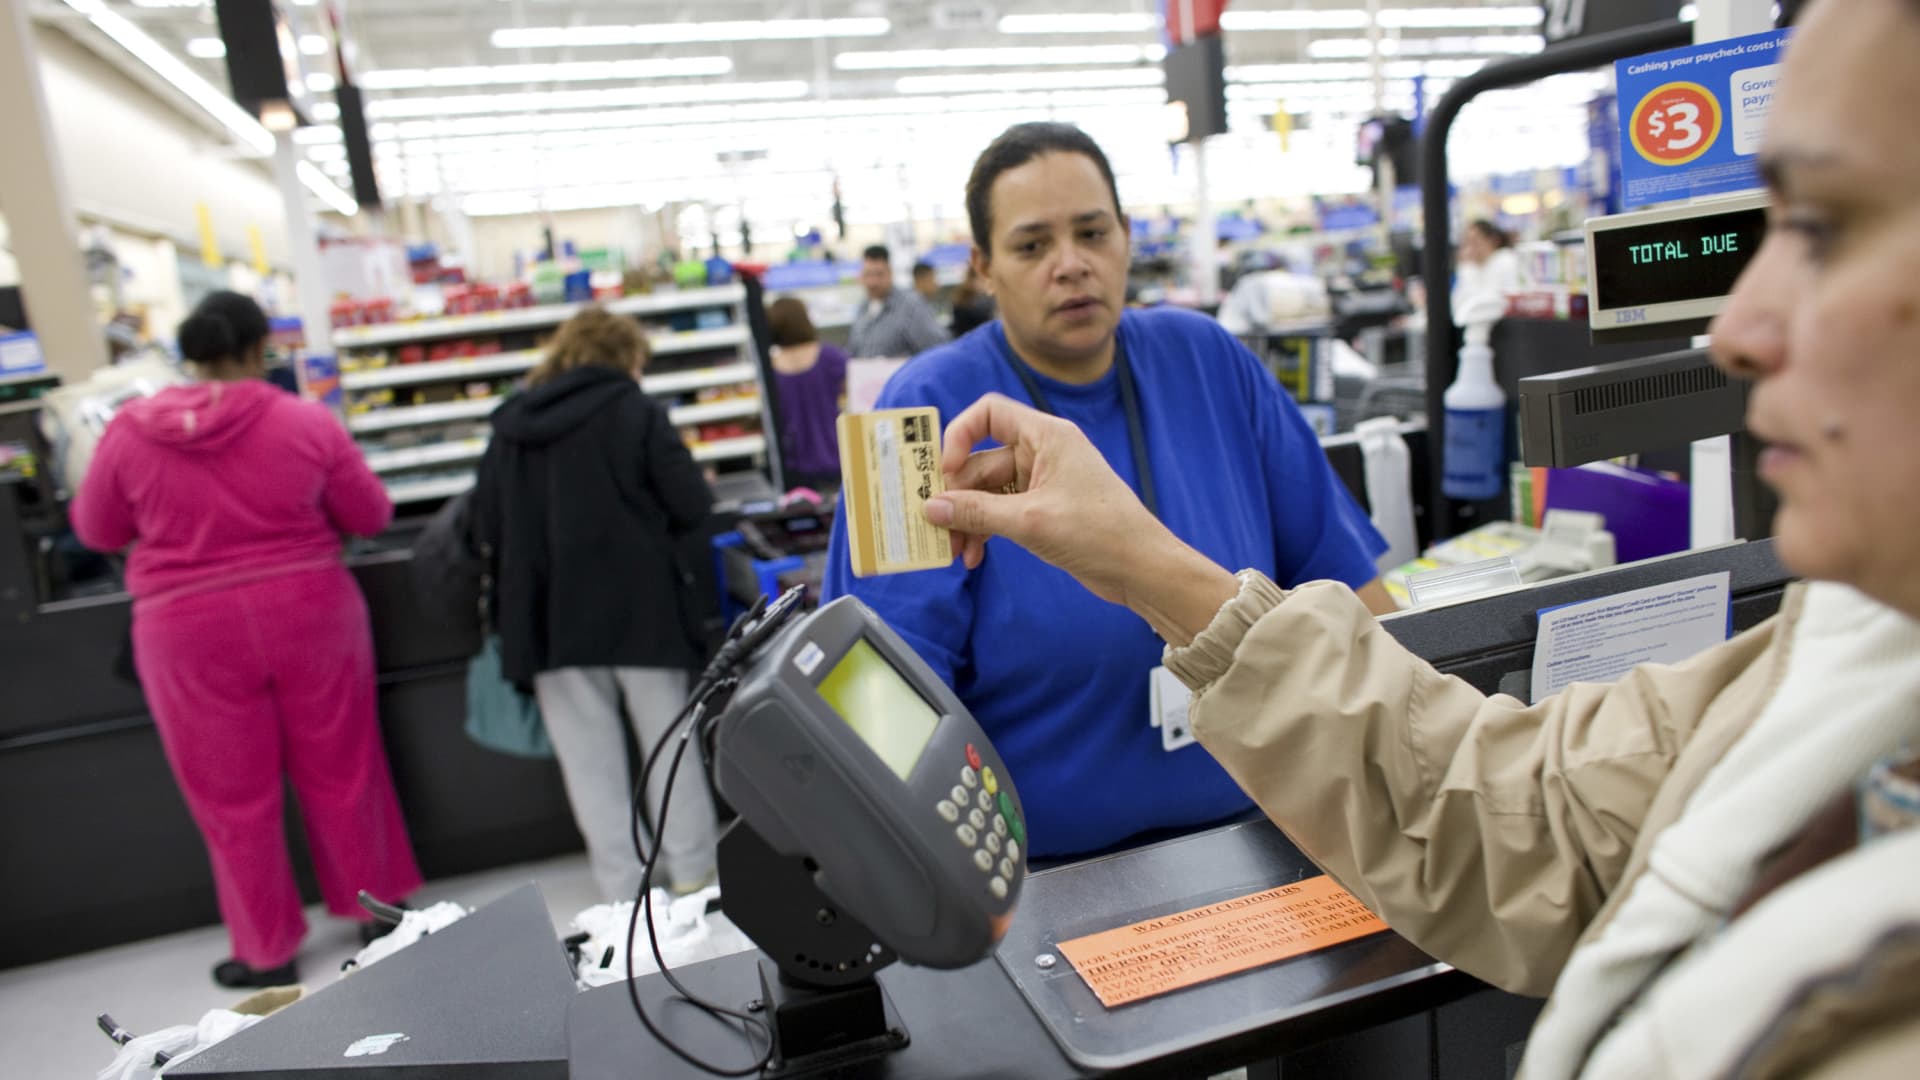 A shopper uses a credit card to pay for her items at a Wal-Mart Supercenter in Denver.